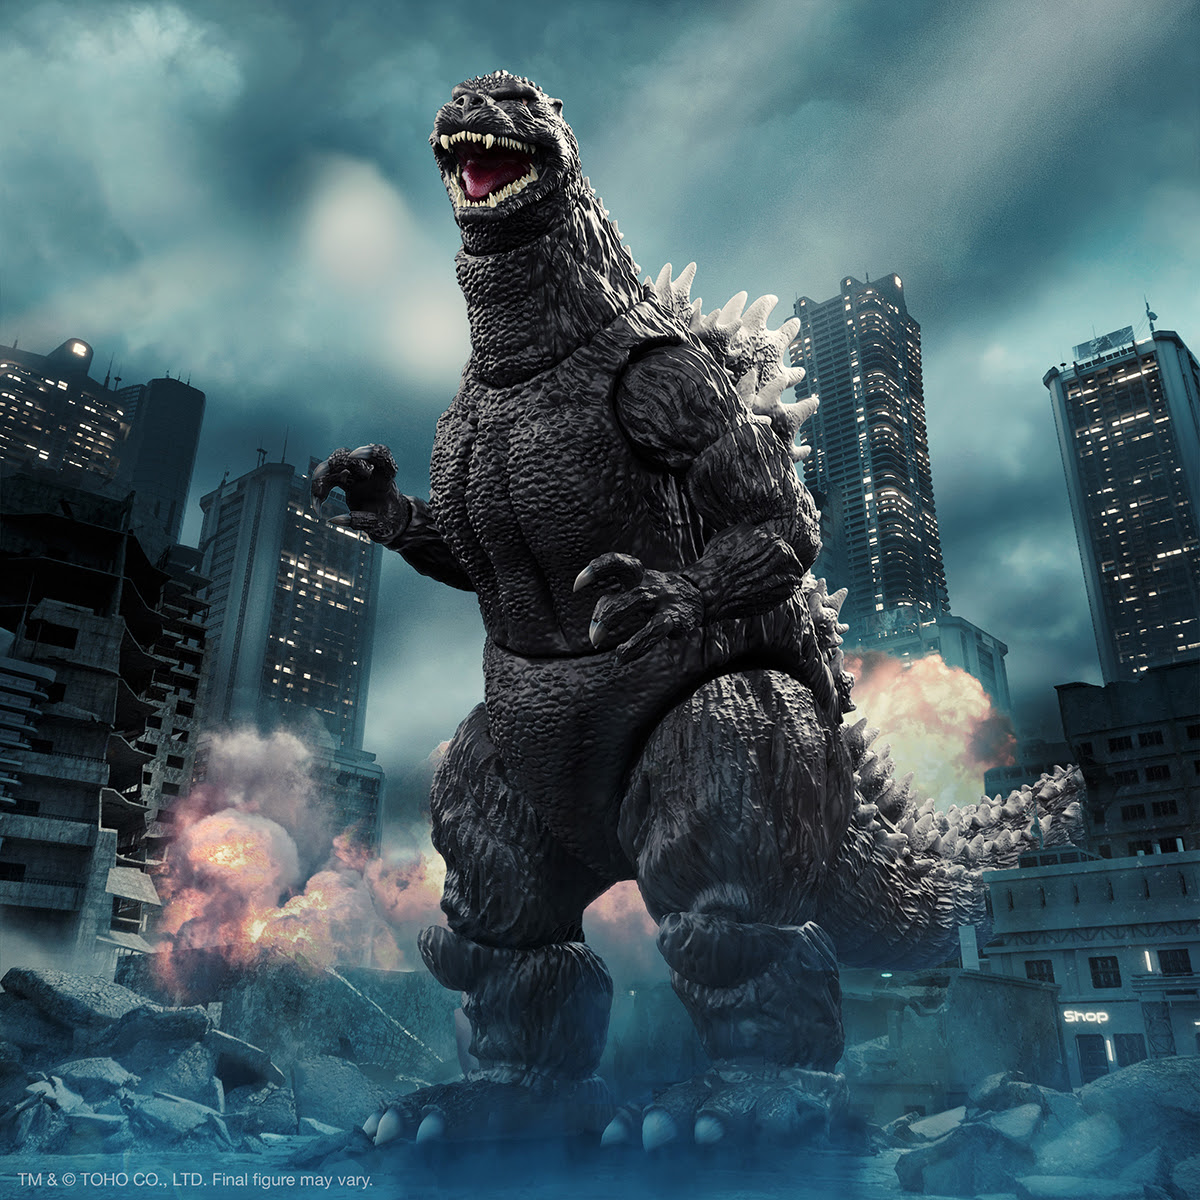 Super7 is kicking off the Toho line of ULTIMATES! with the stars of the 1989 film, Godzilla vs. Biollante! 